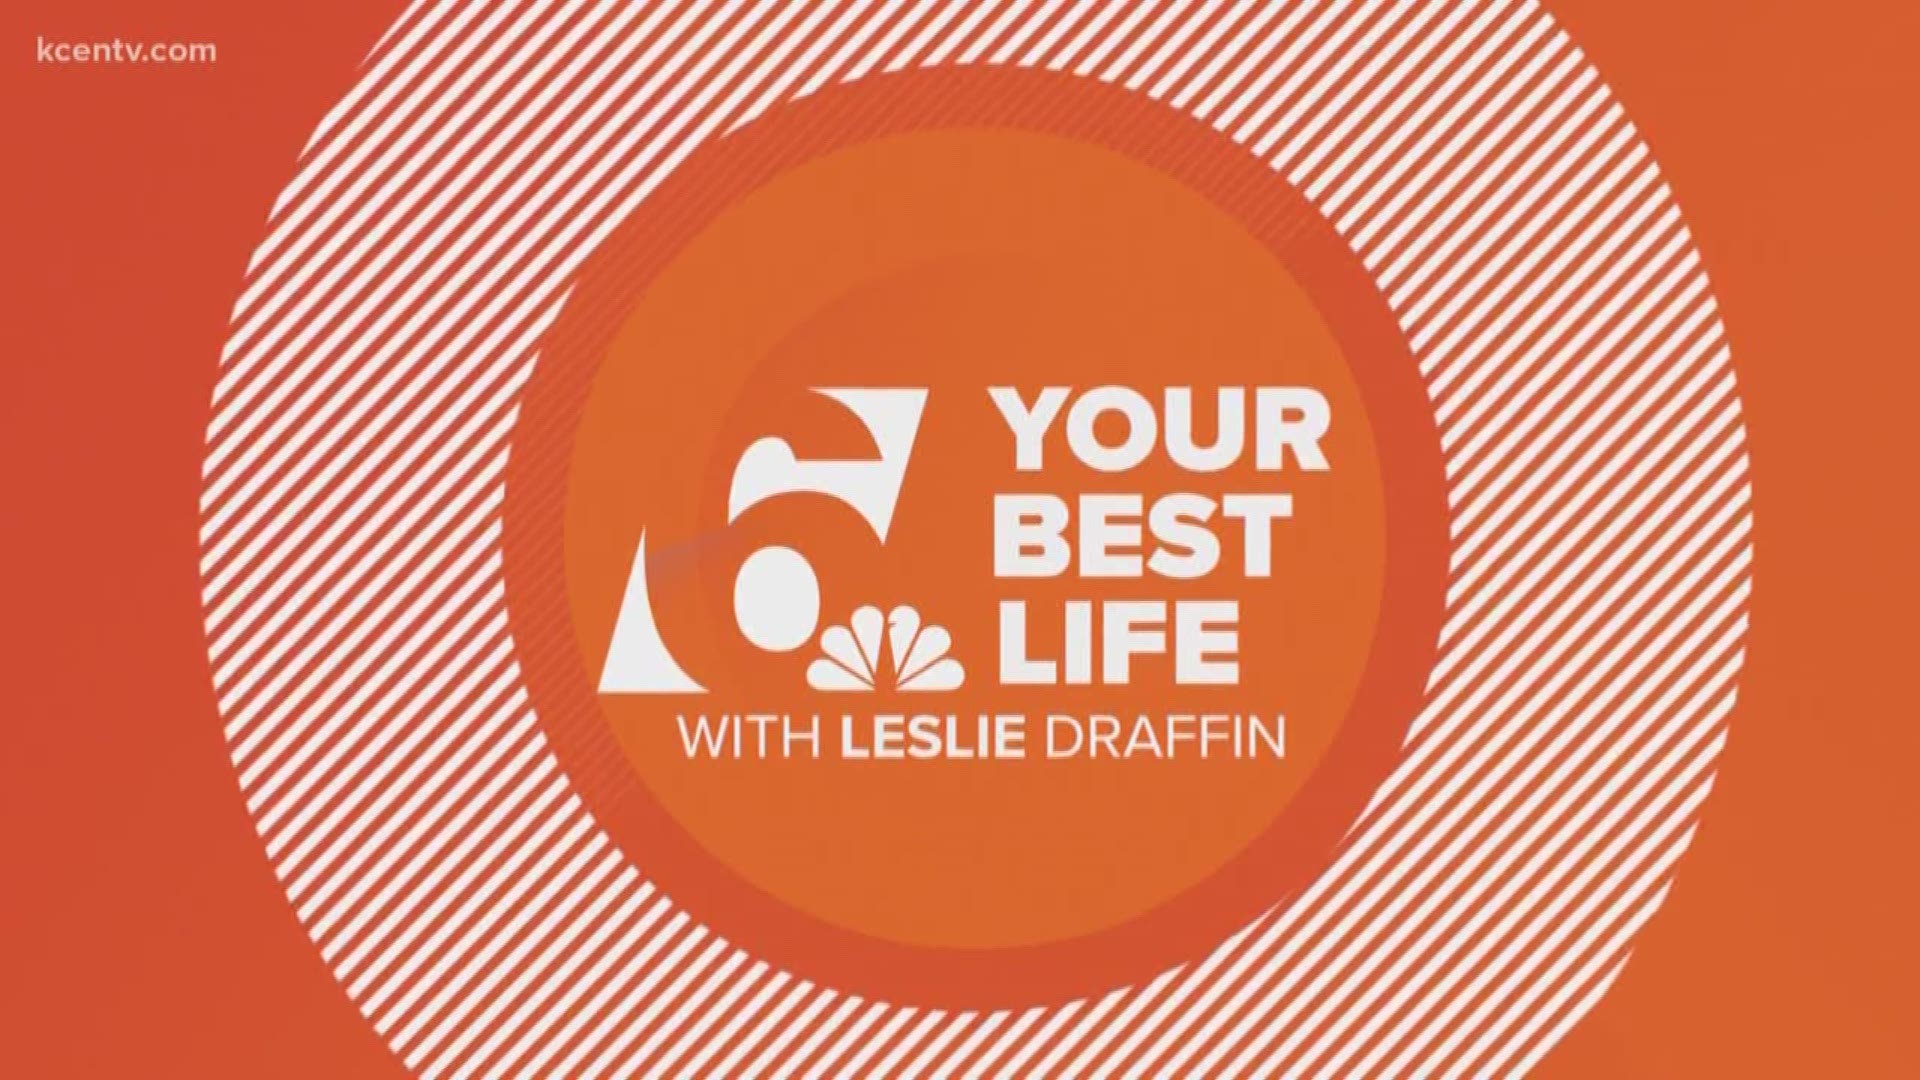 Evening anchor Leslie Draffin explored how crystals affect wellness in this edition of Your Best Life.